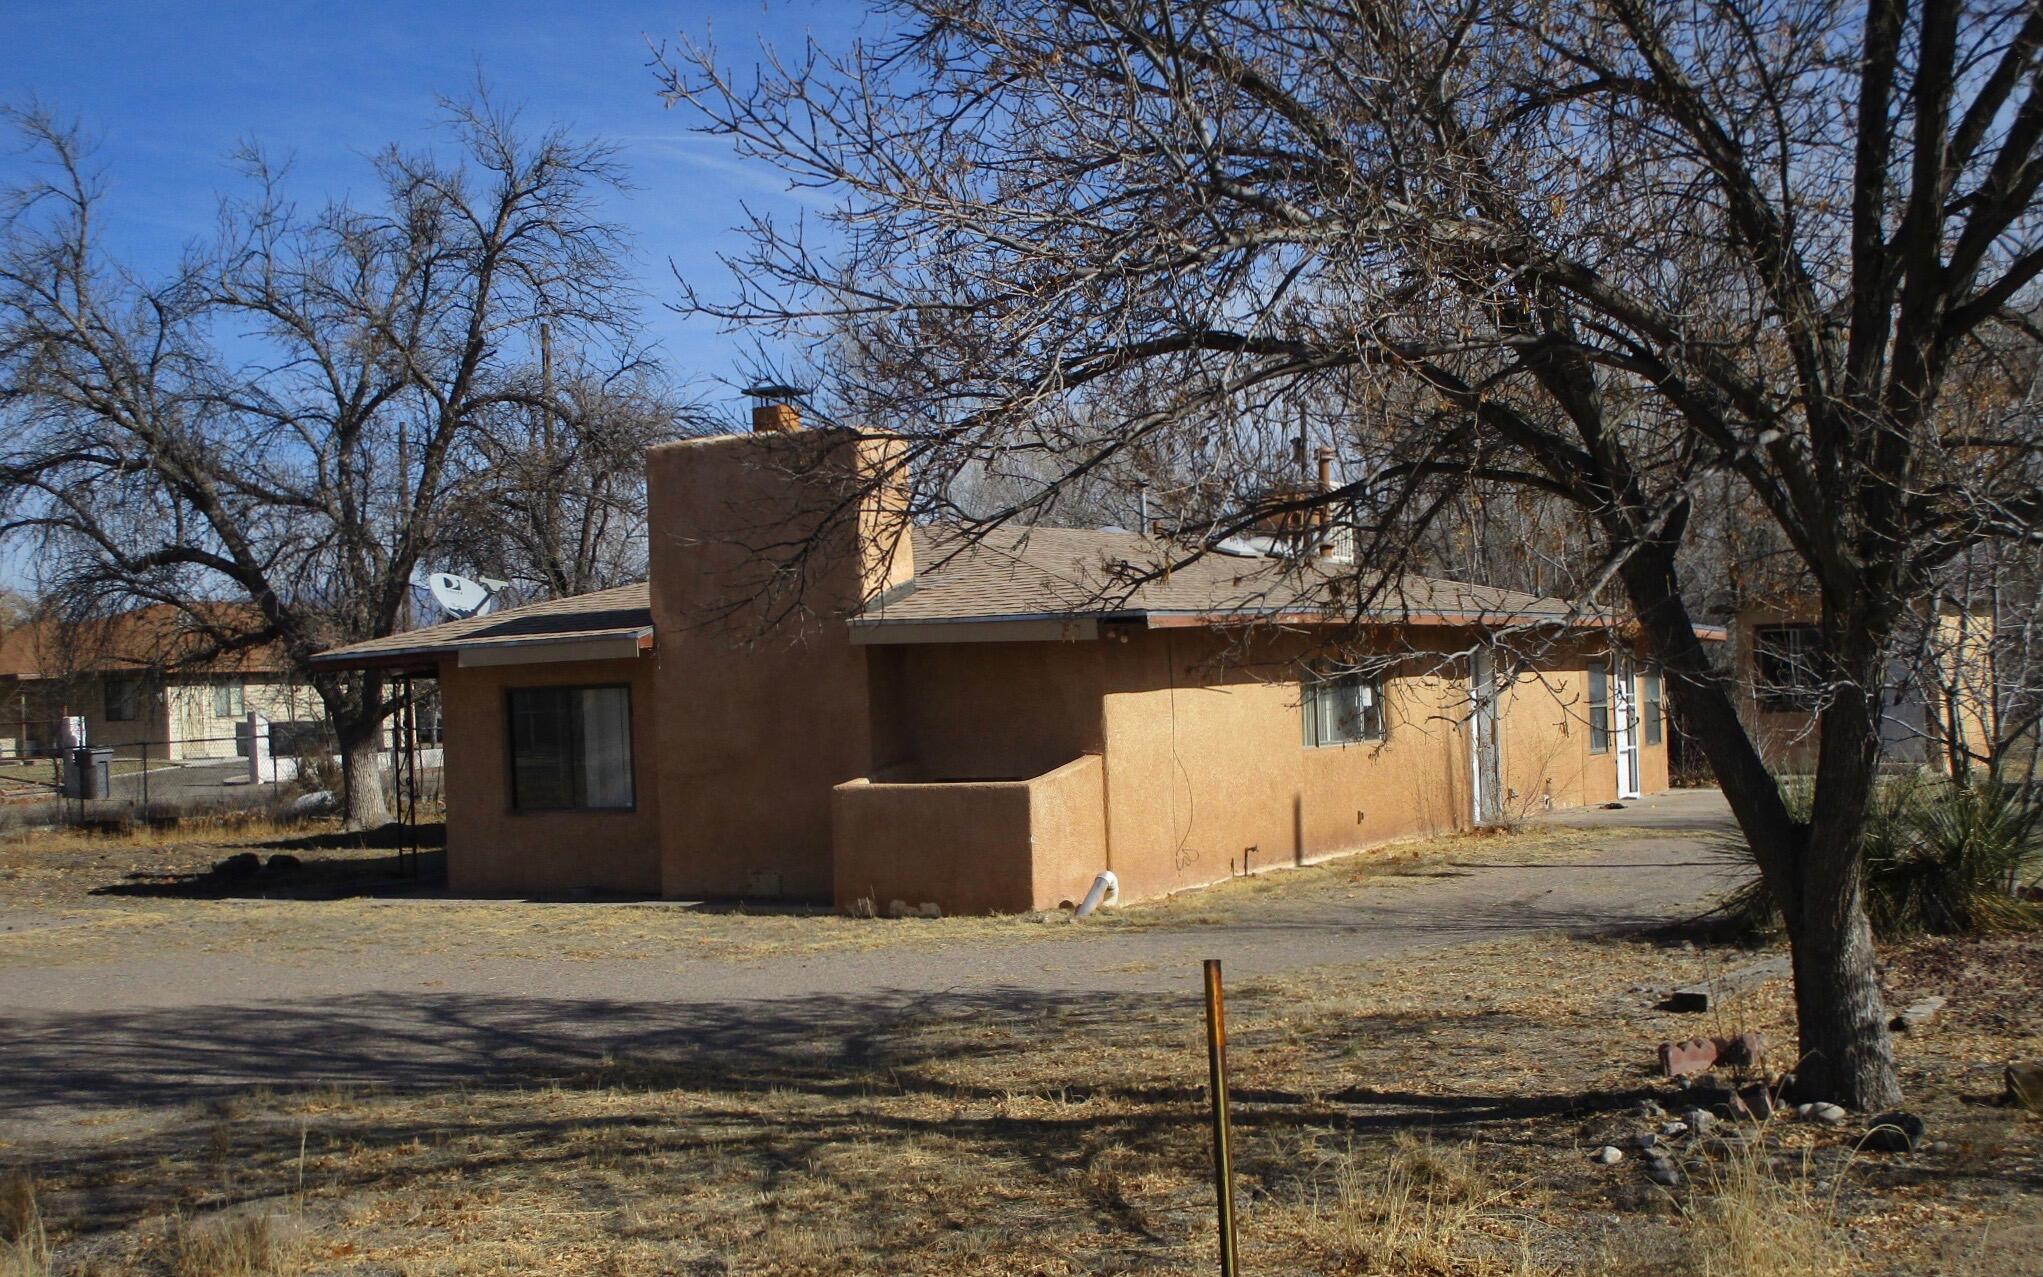 DIAMOND IN THE ROUGH!! Great SOUTHWEST VALLEY FARMS  location for this Unique SINGLE FAMILY HOME oozing with potential. 3 Bedrooms, 2 Bath, 1959 sqft.  sitting  on 2 ACRES. Enjoy relaxing in the LARGE LIVING ROOM  next to the Fireplace or Barbecuing in the backyard. Needs a Little TLC. Conveniently located! Close to parks, shopping, transit and schools. ***No warranties or guarantees expressed or implied! Buyer to pay for their own Inspections for Buyers knowledge only!*